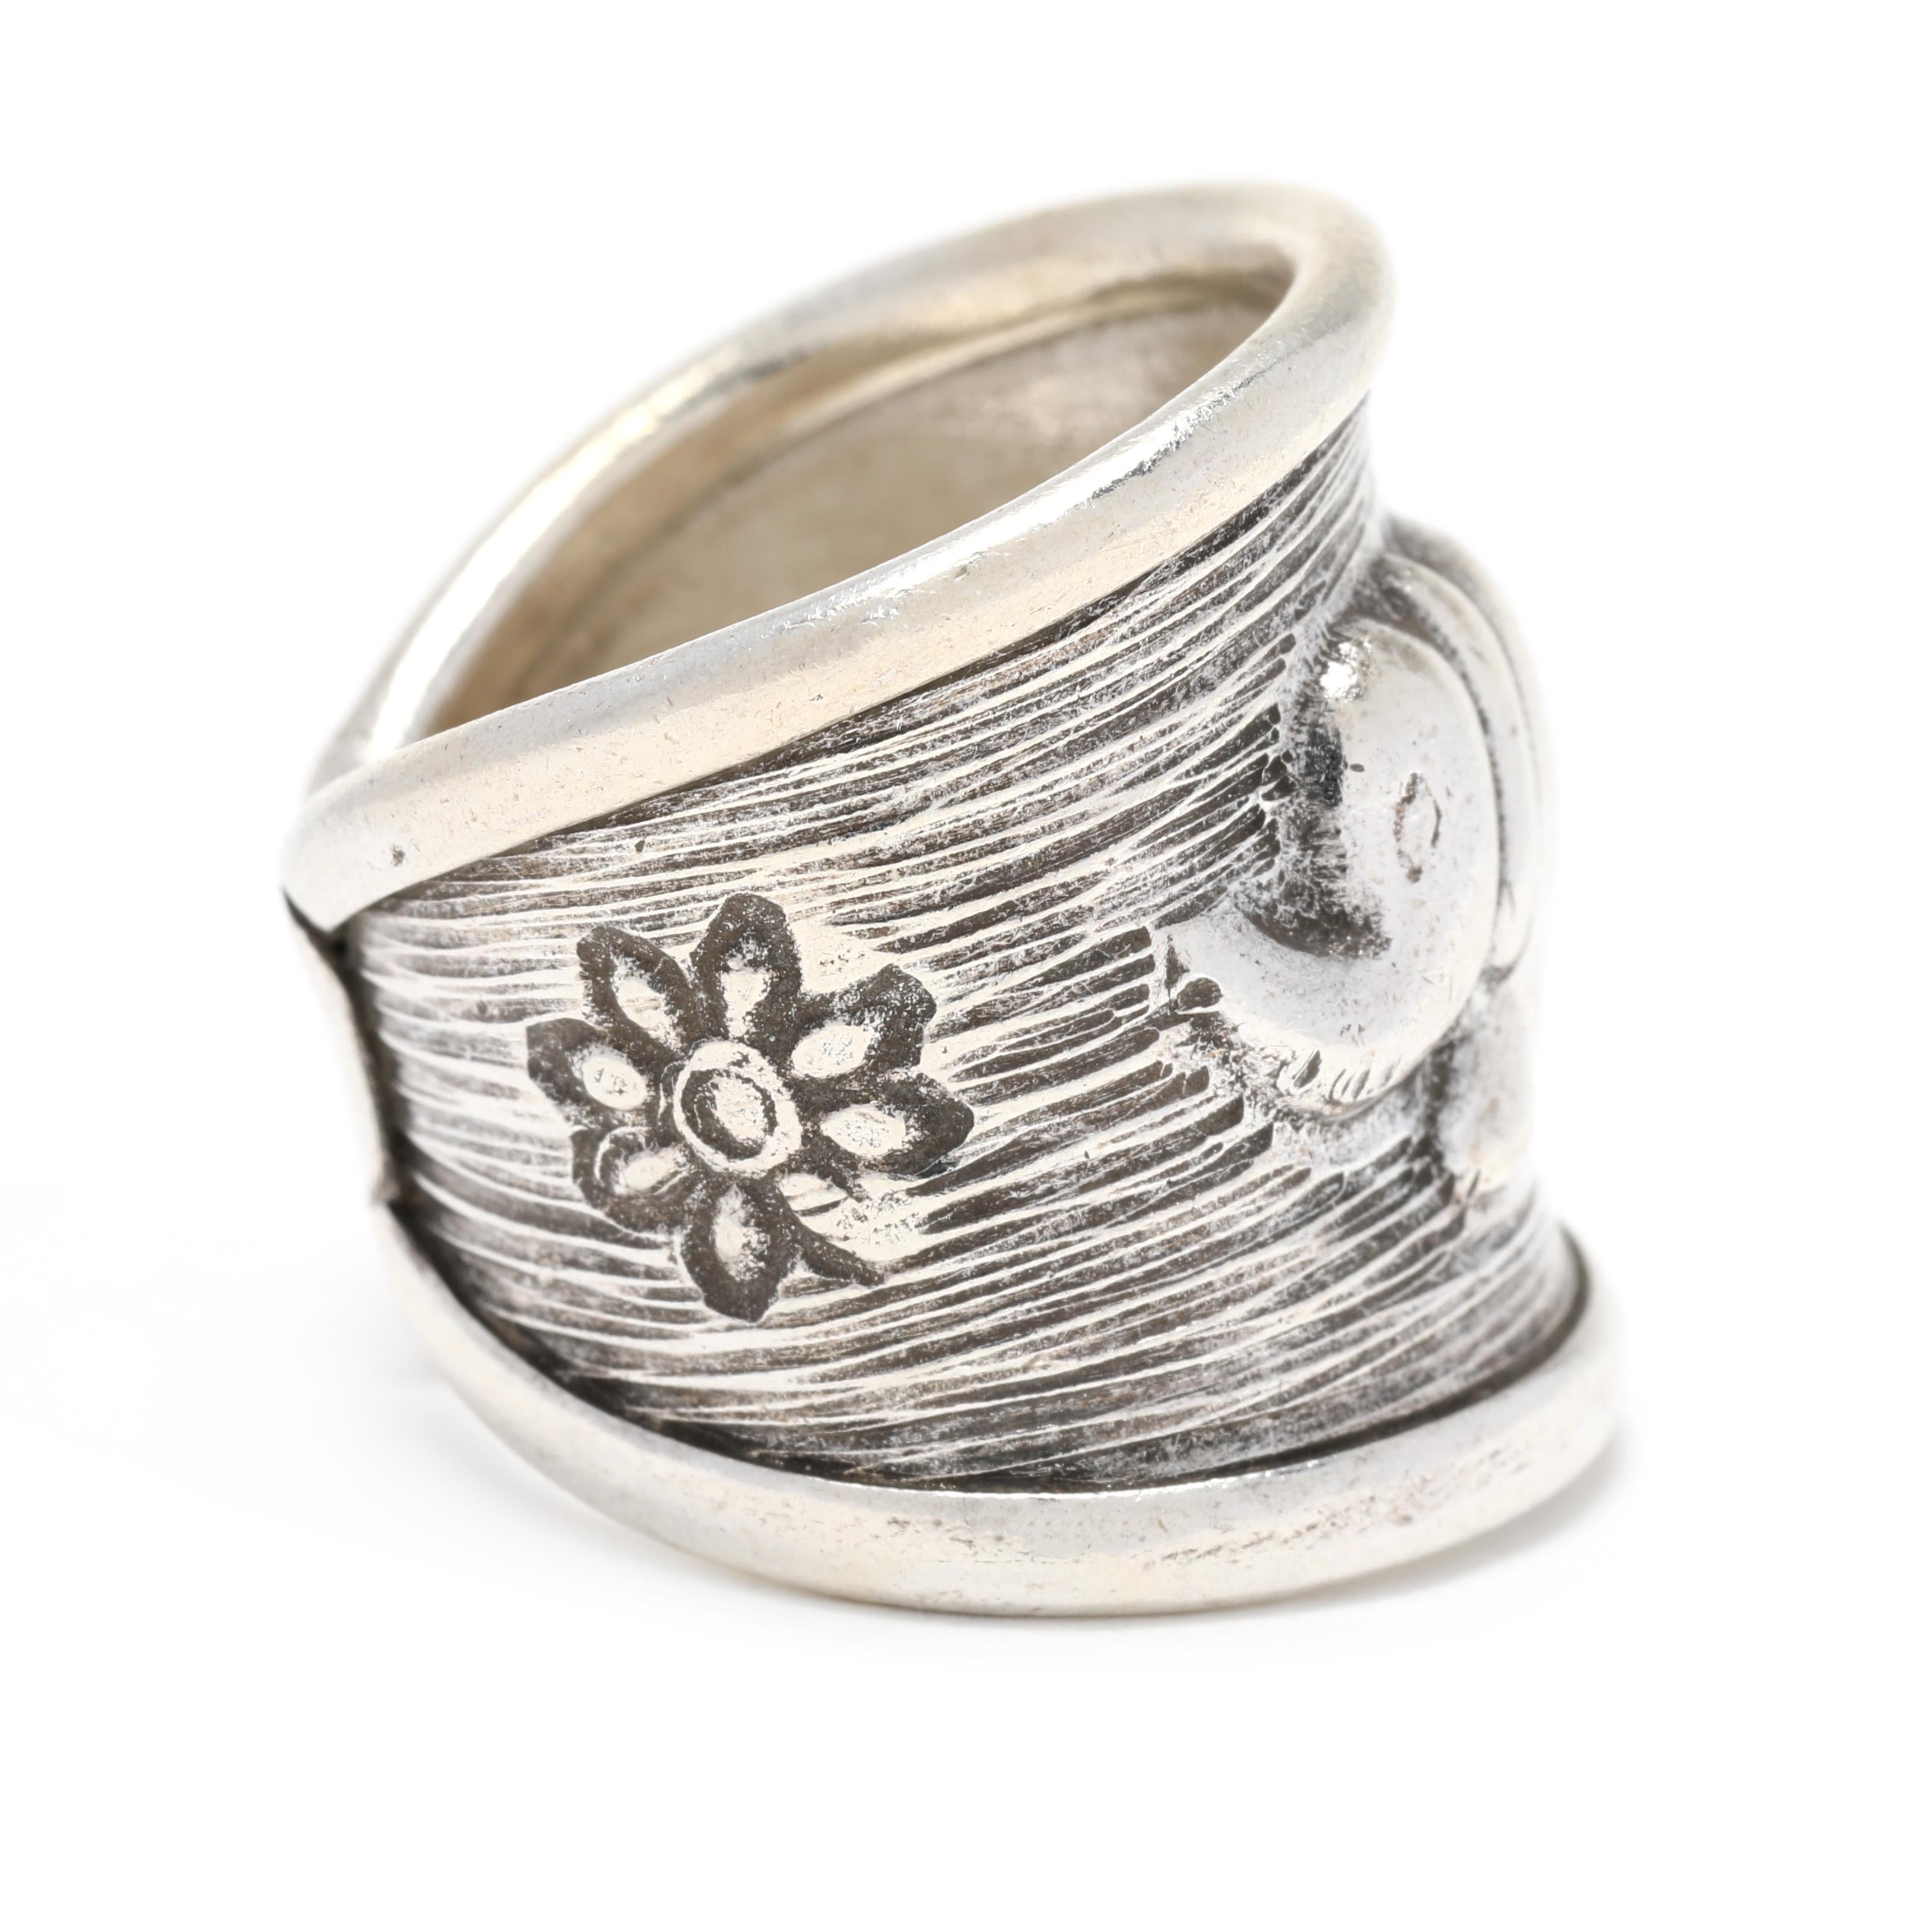 Make a statement with this beautiful Wide Elephant Band Sterling Silver Ring. Crafted from high-quality sterling silver with a unique elephant design, this ring is sure to become a cherished favorite. The perfect addition to any jewelry collection,